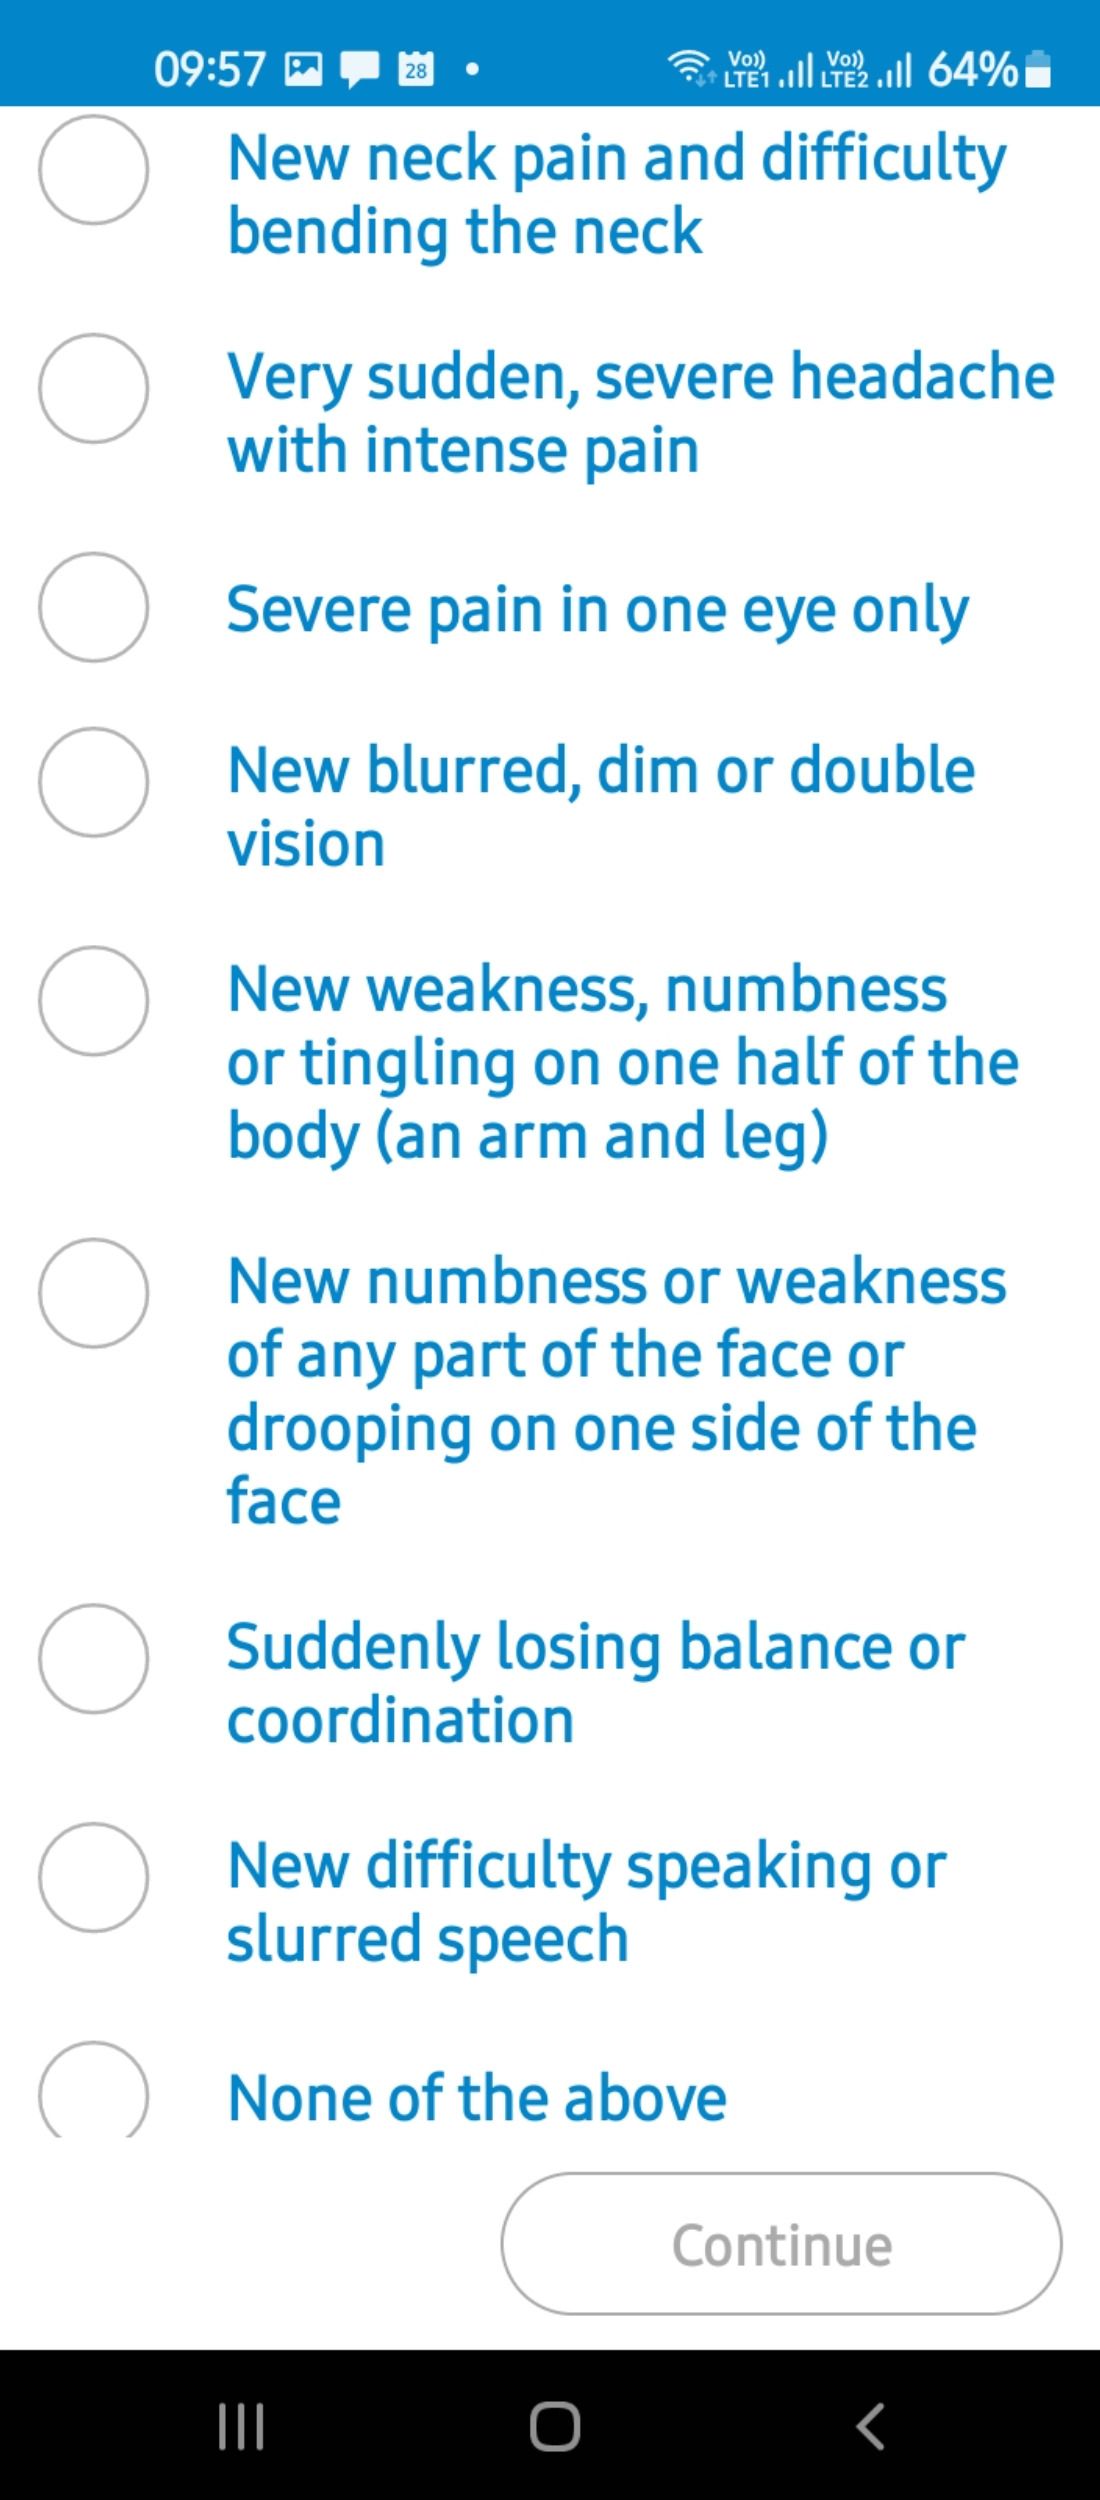 Symptom checker questionnaire in the Sensely app